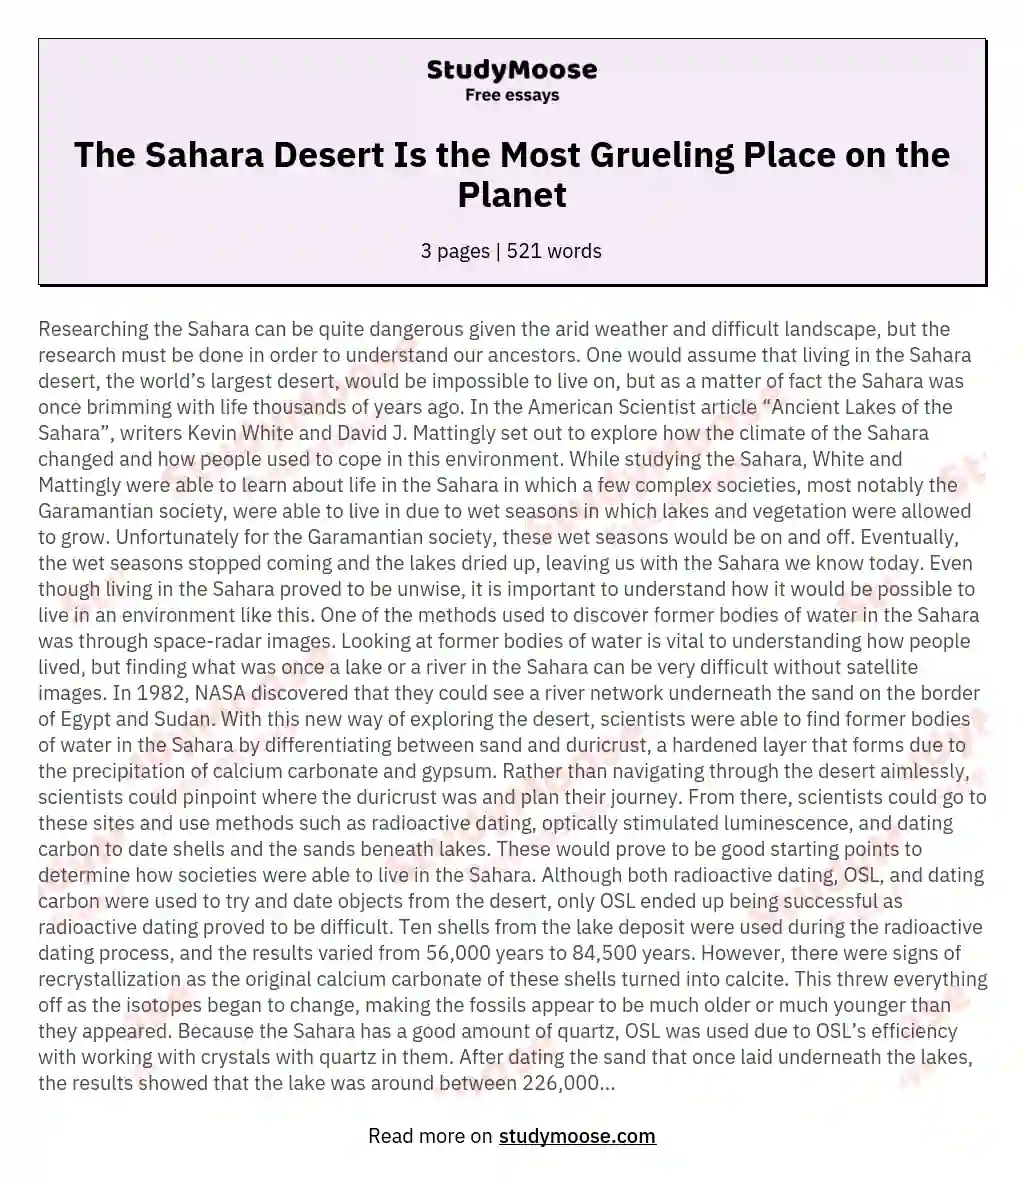 The Sahara Desert Is the Most Grueling Place on the Planet essay